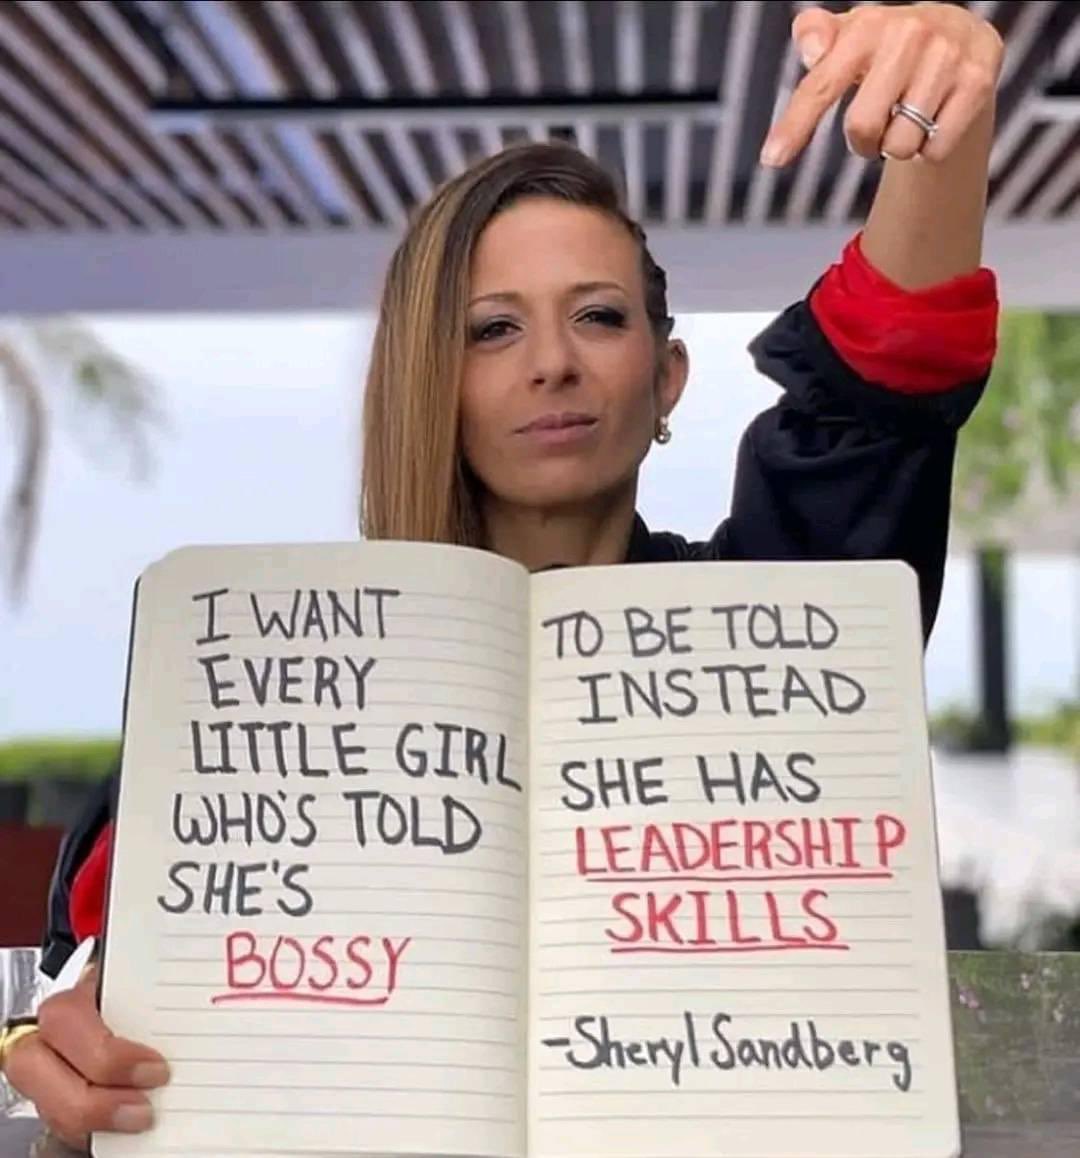 Being bossy and being a leader are two very different things.